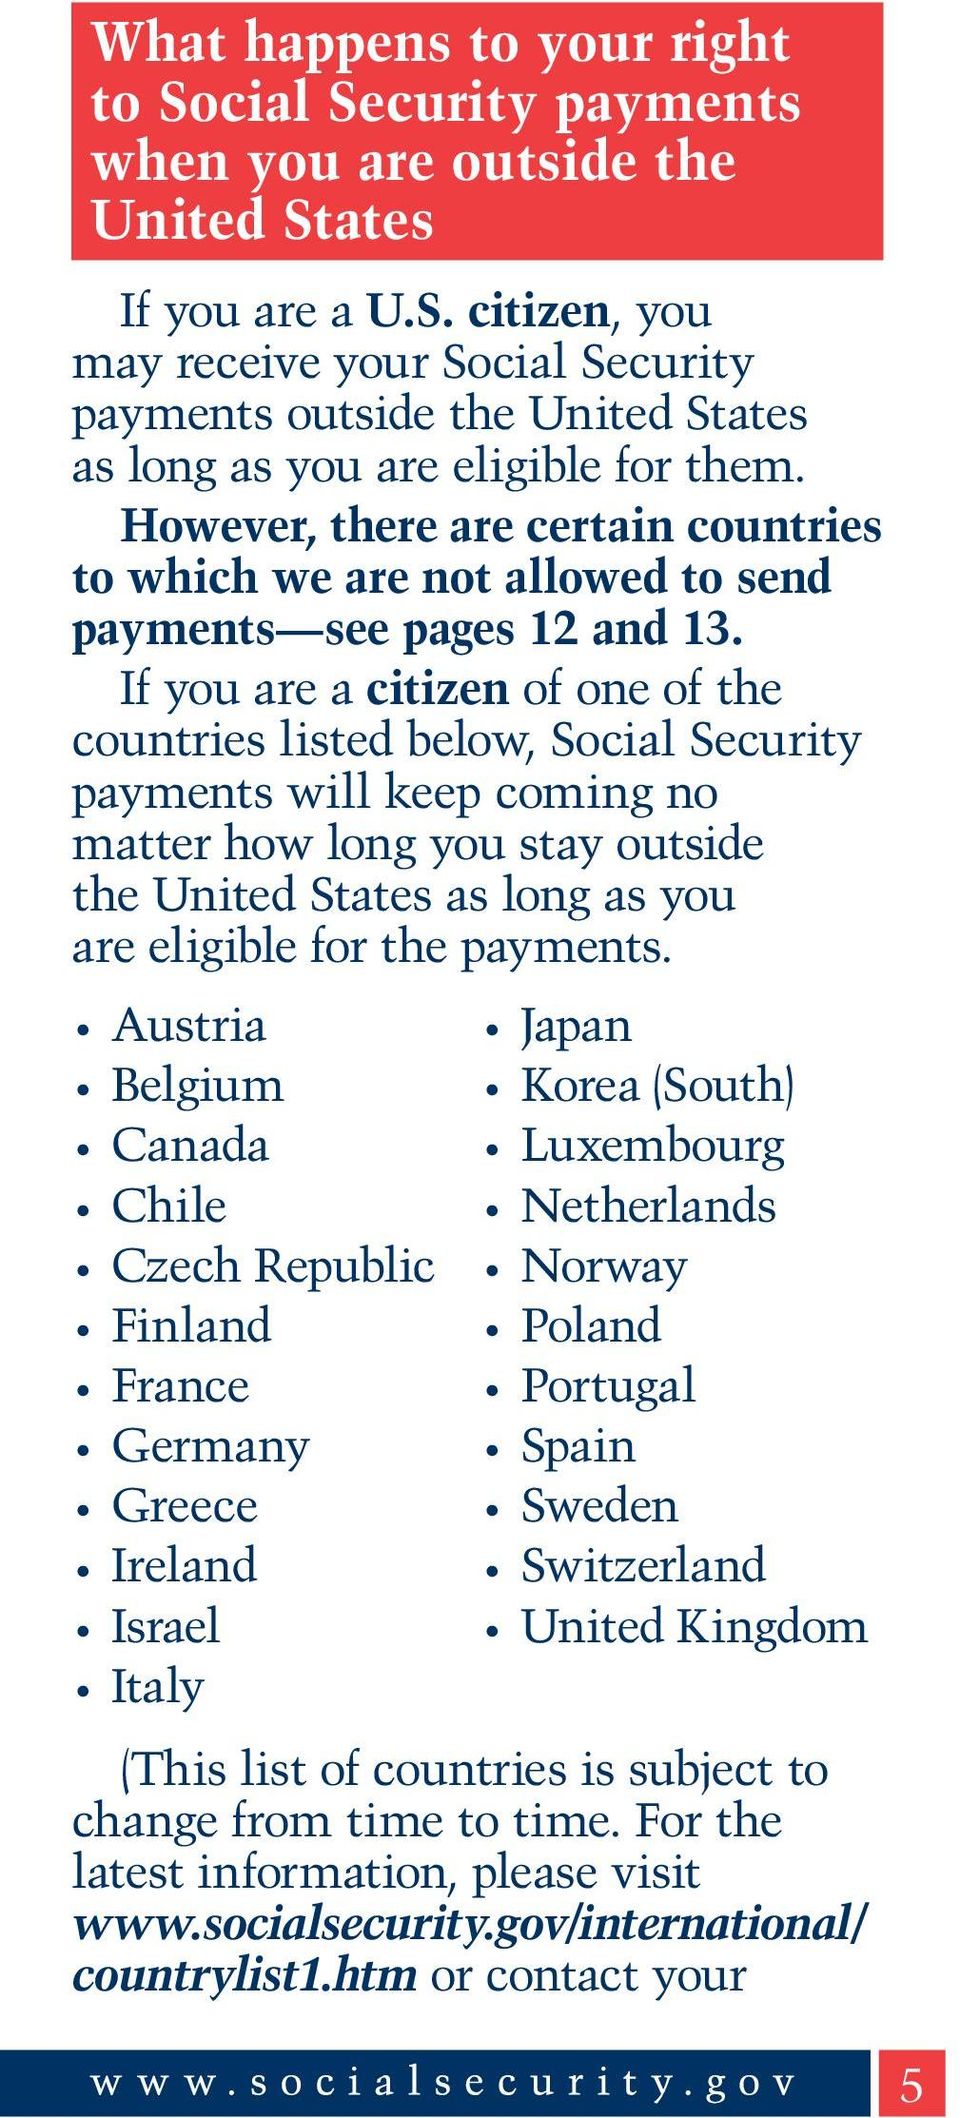 If you are a citizen of one of the countries listed below, Social Security payments will keep coming no matter how long you stay outside the United States as long as you are eligible for the payments.